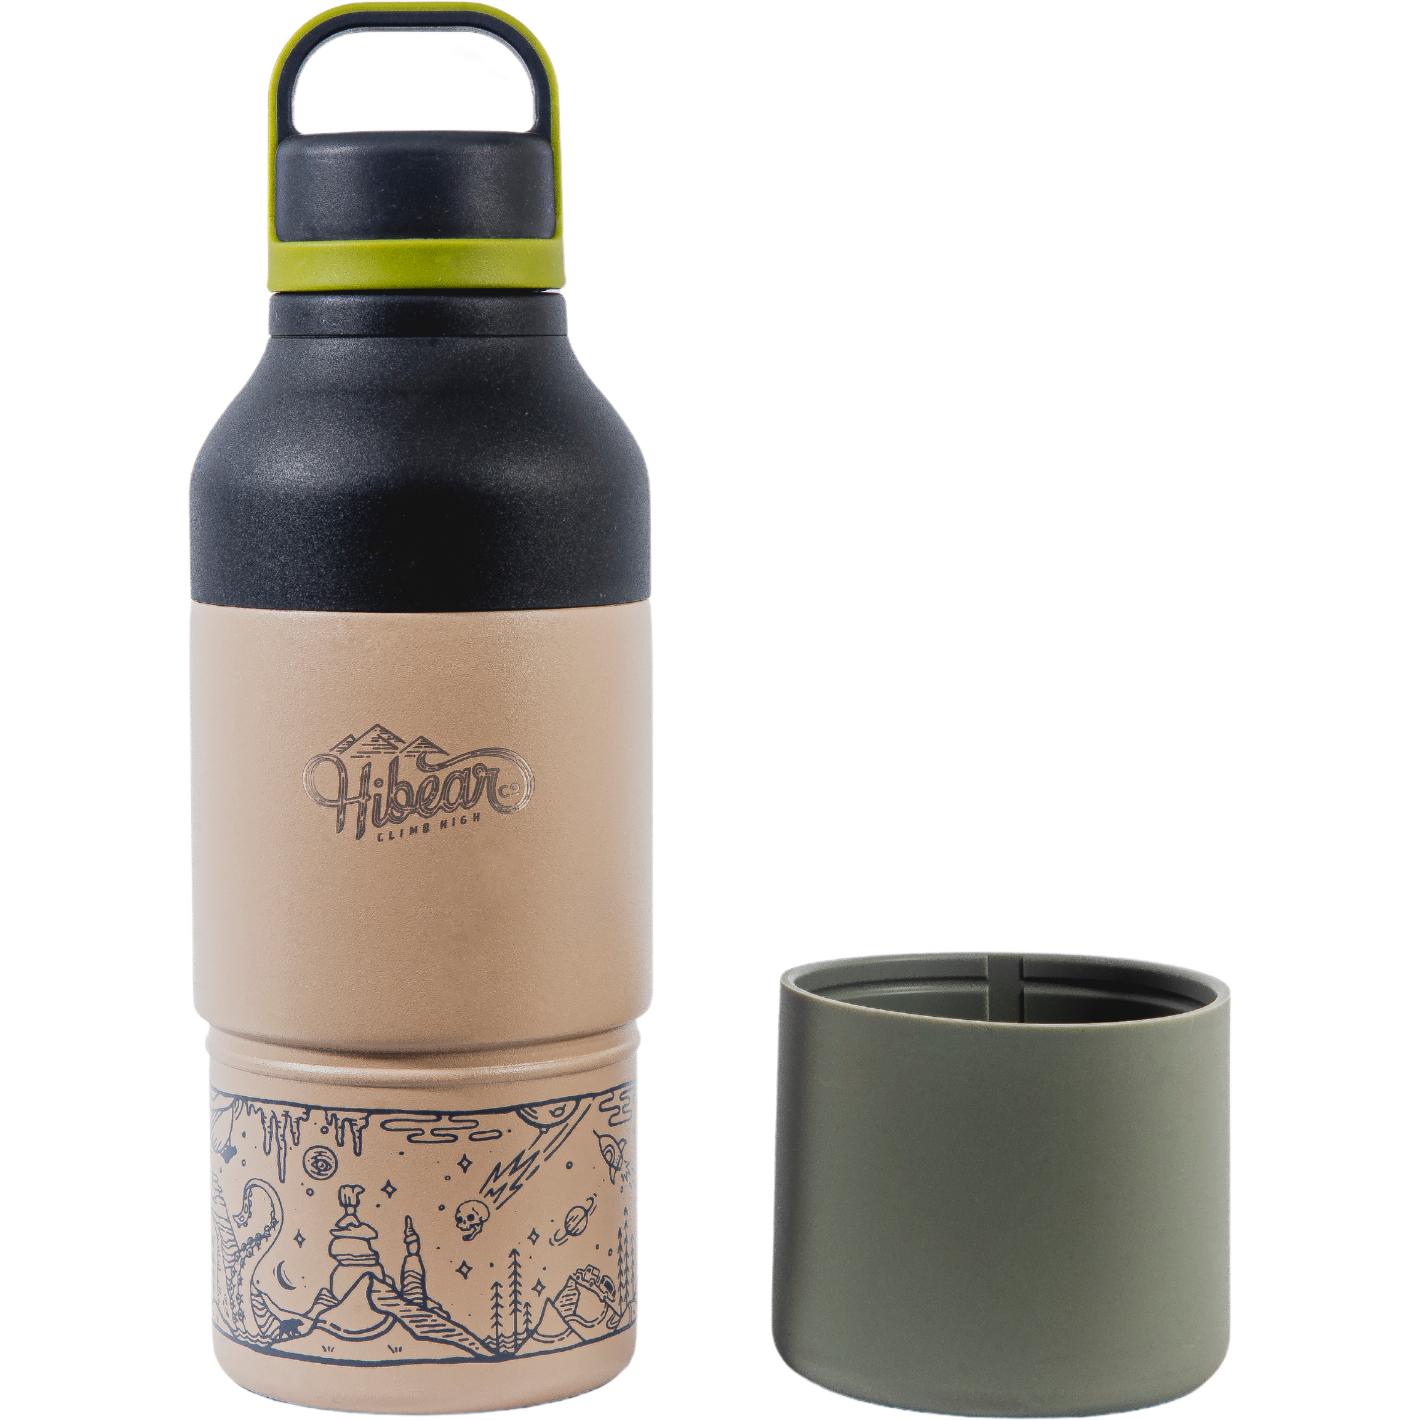 Travelin' In My Mind - 32 oz All-Day Adventure Flask